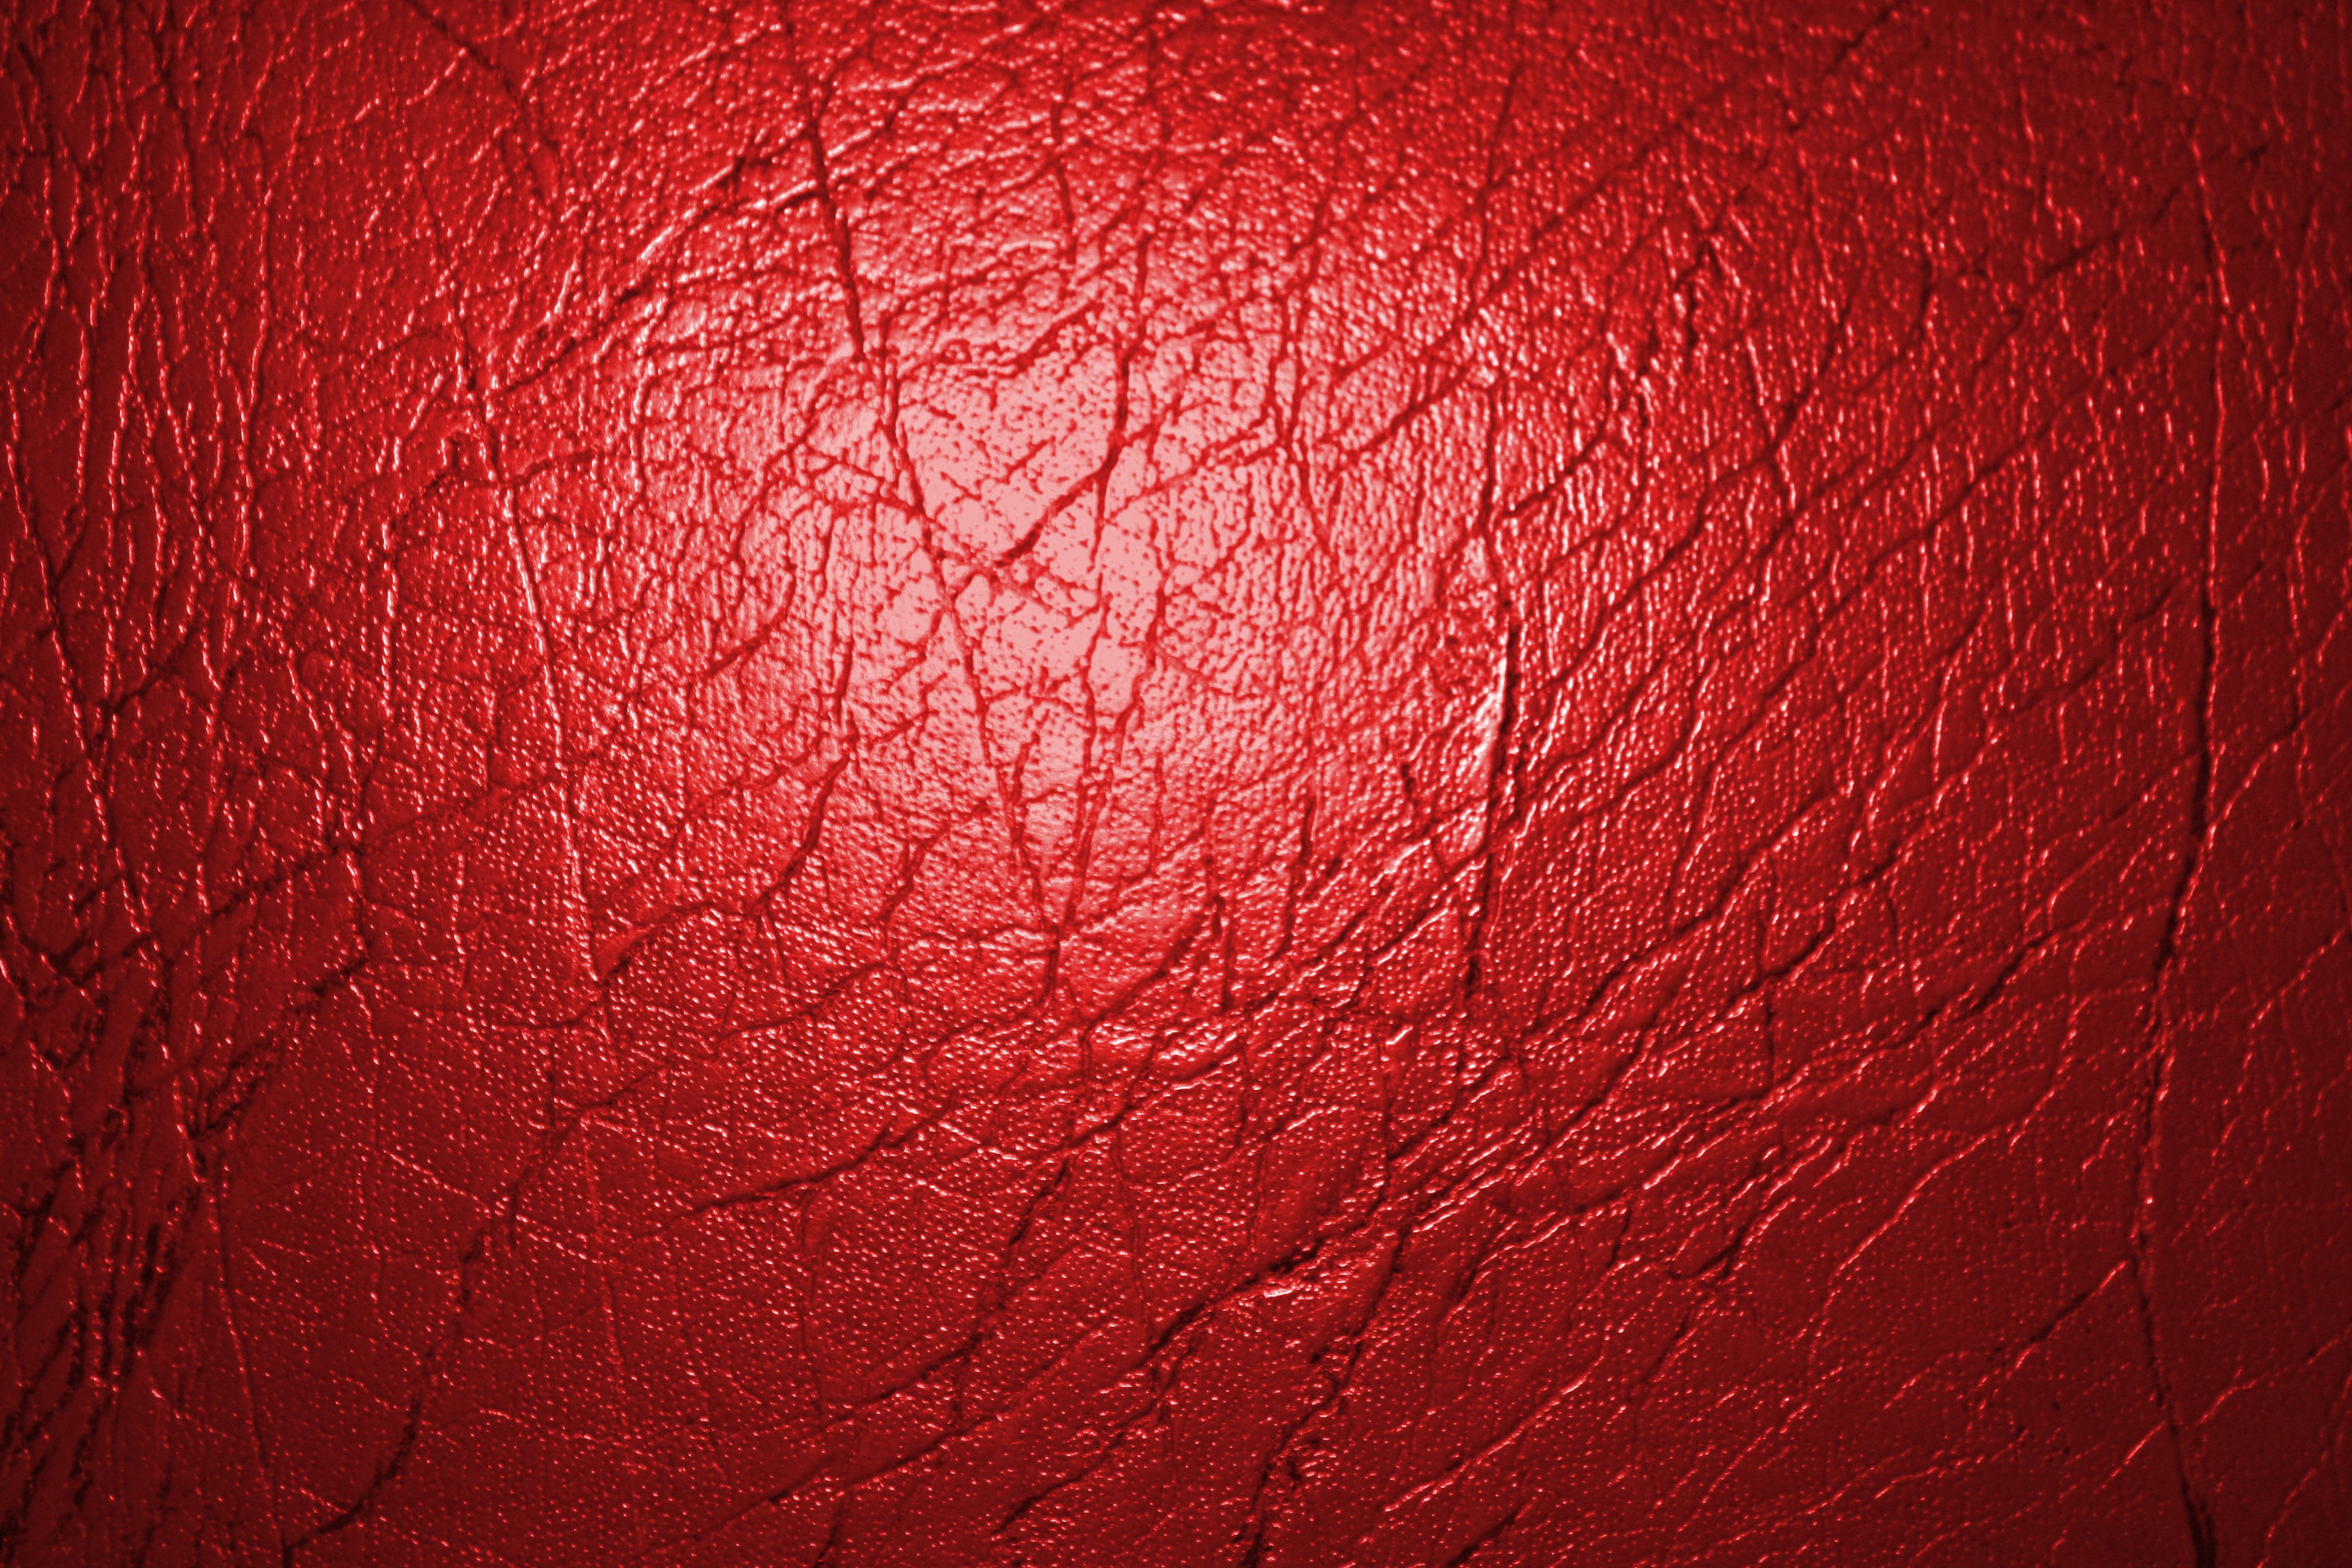 Red Leather Texture   Free High Resolution Photo   Dimensions 3888